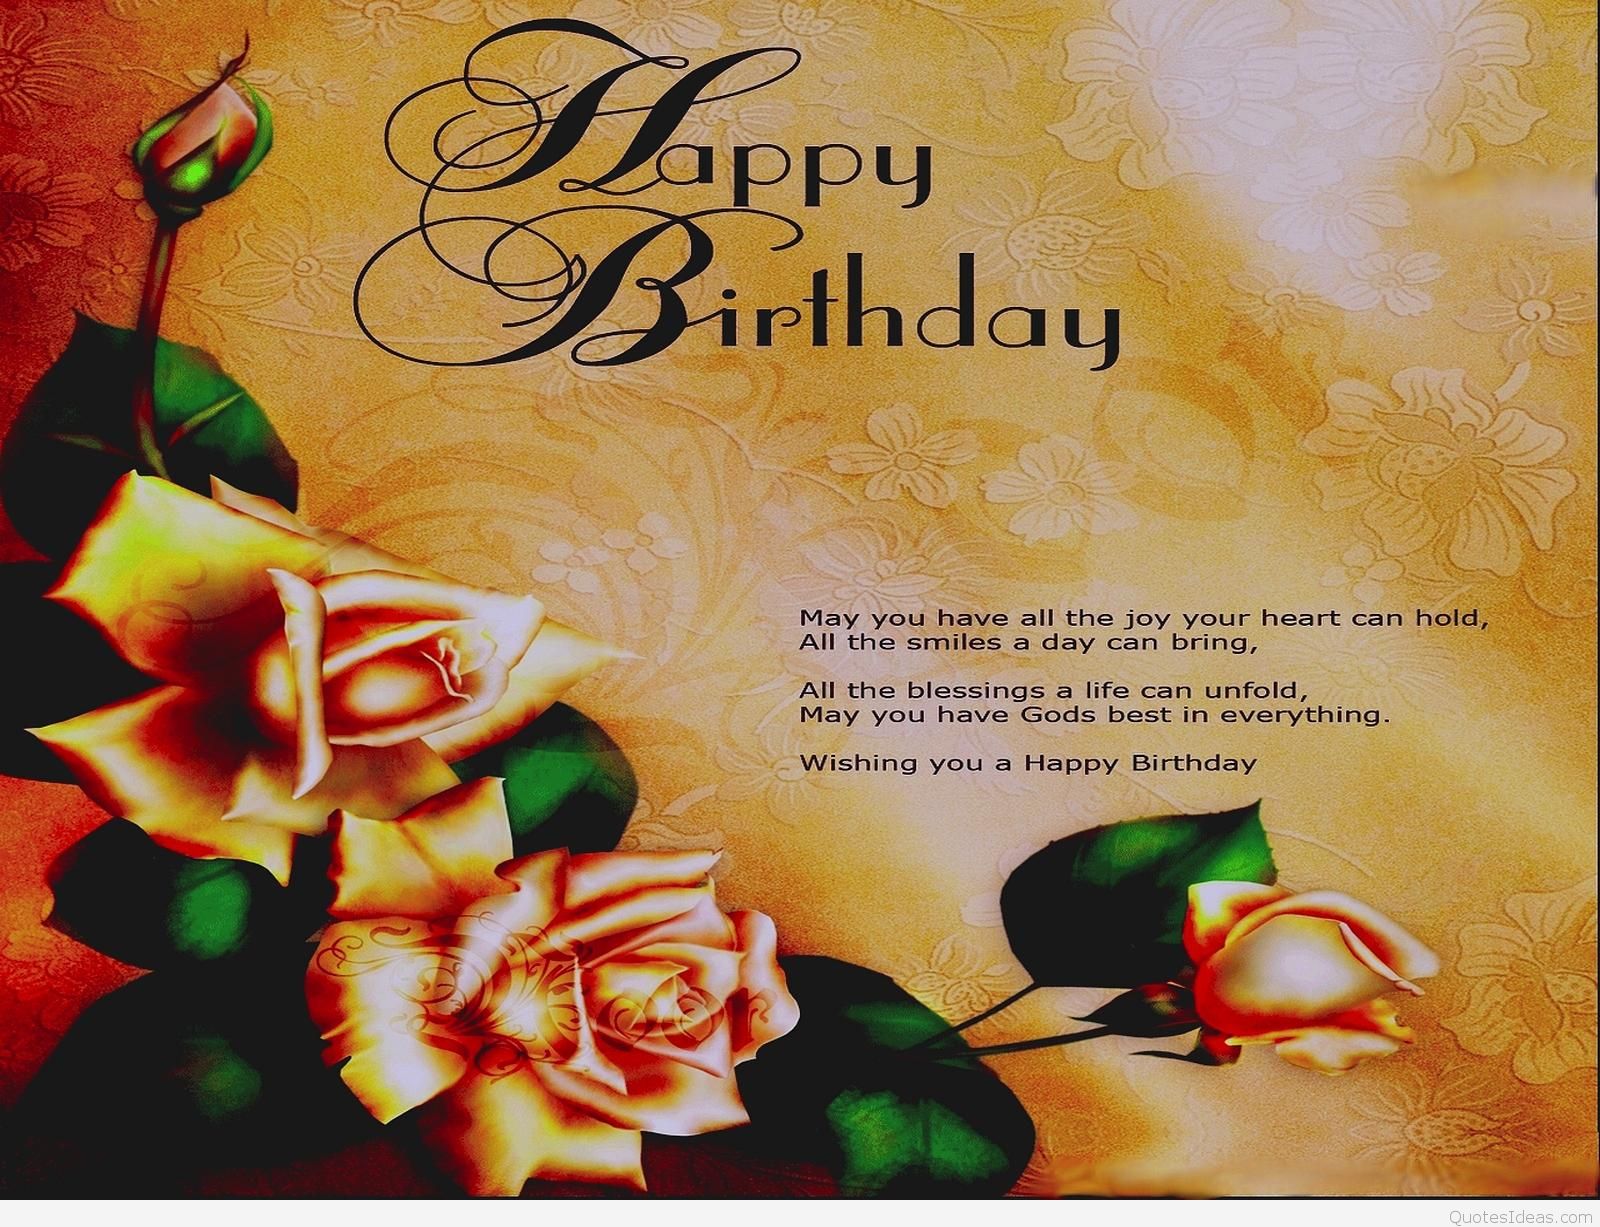 Happy Birthday Wallpapers With Name Wallpaper - Happy Birth Day Wish Hd - HD Wallpaper 